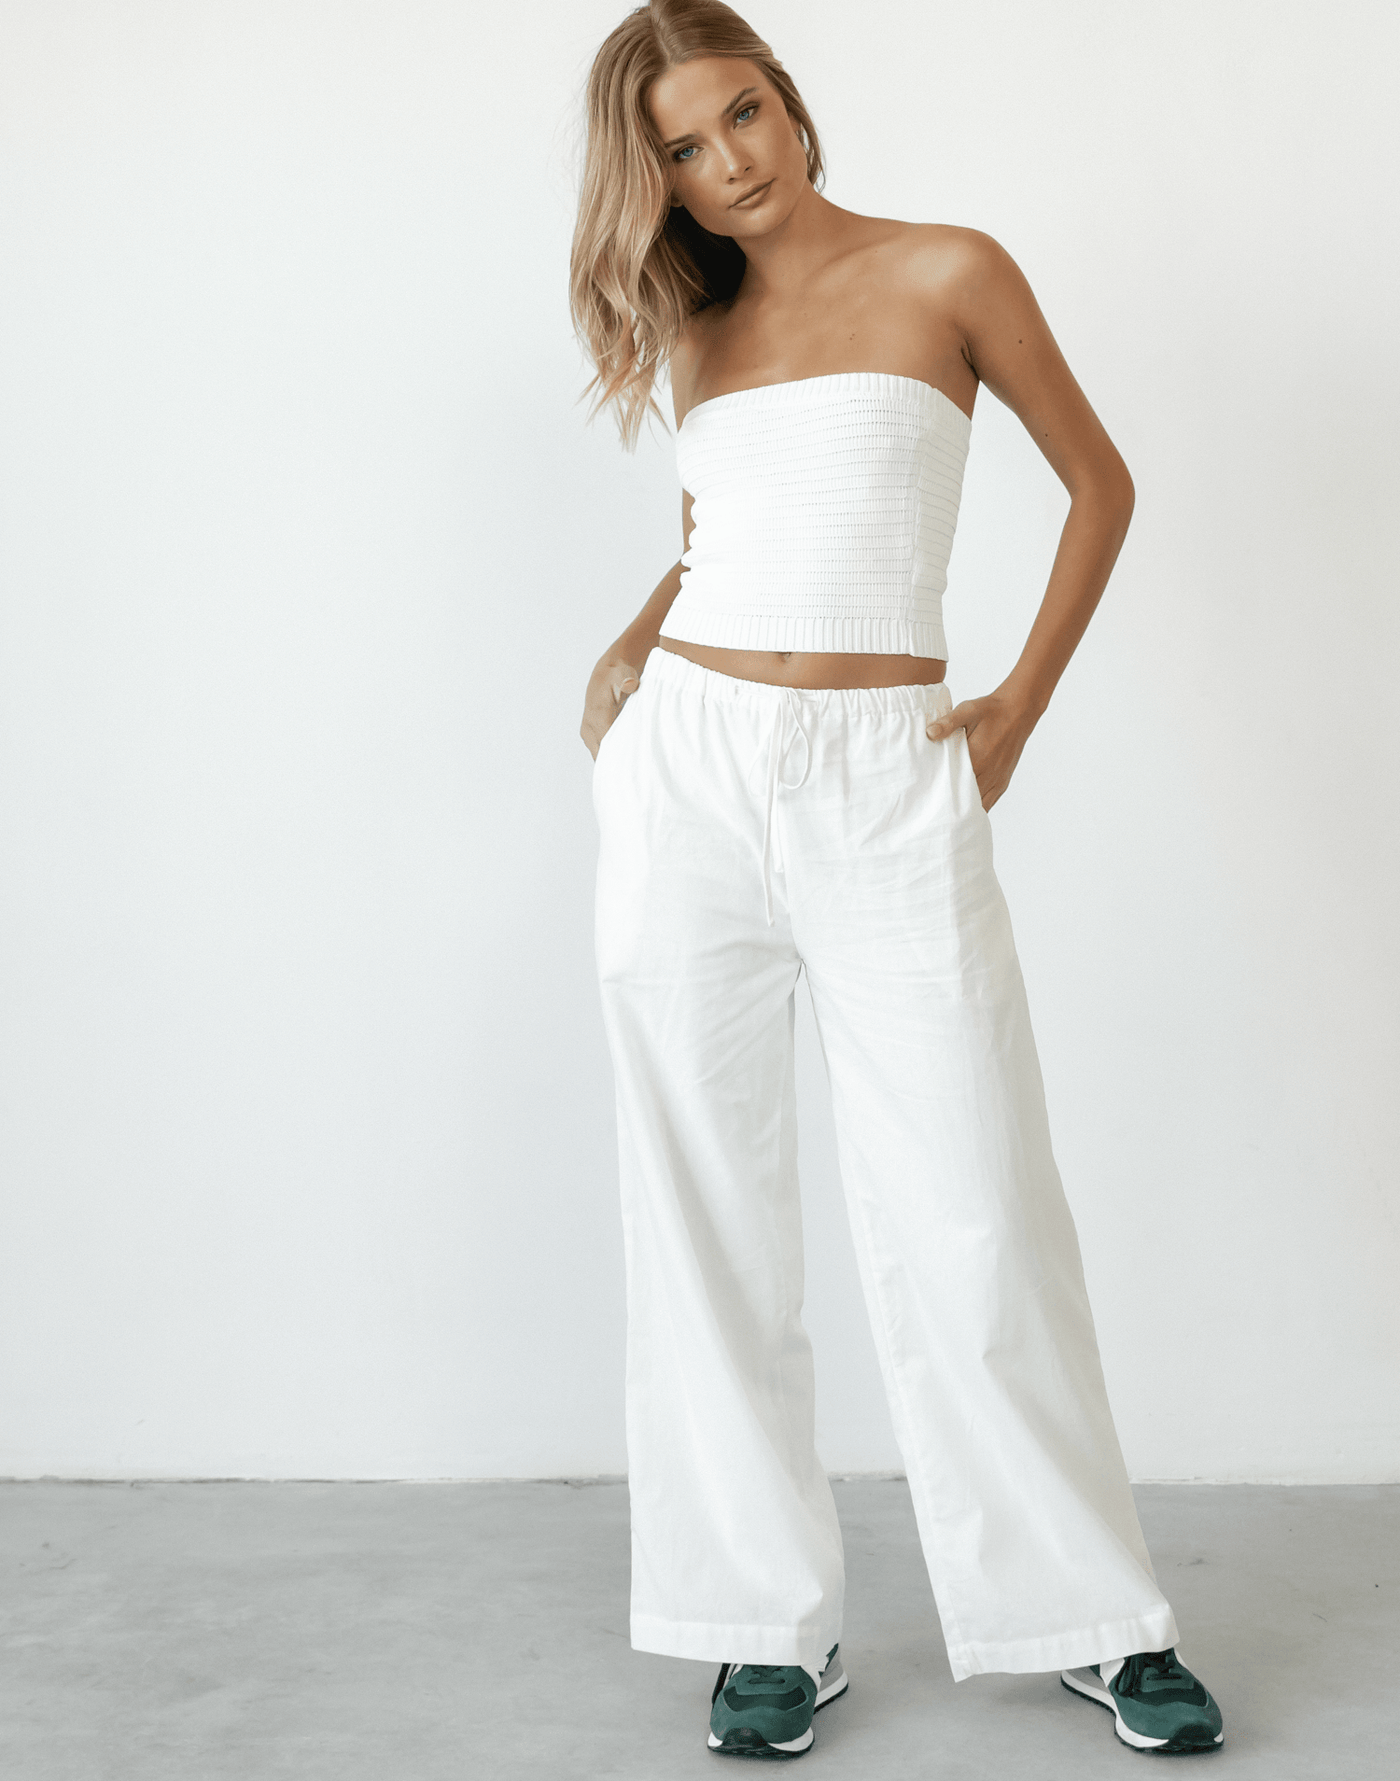 Lytton Strapless Crop Top (White) - Ribbed Knit Strapless Top - Women's Top - Charcoal Clothing